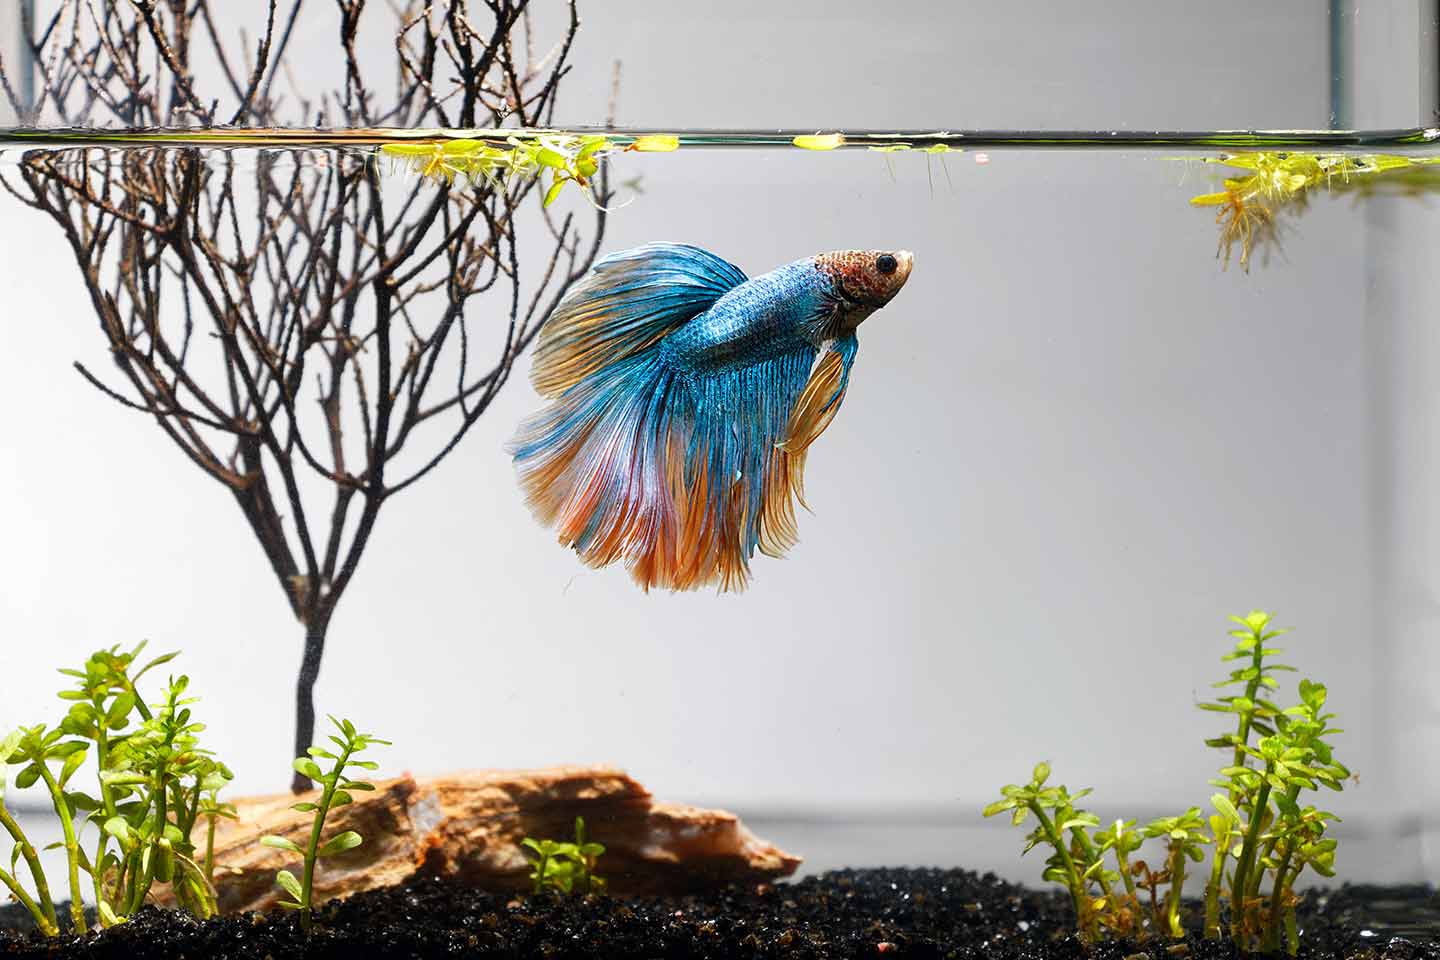 Betta Fish Care: How to Keep a Betta Healthy and Happy